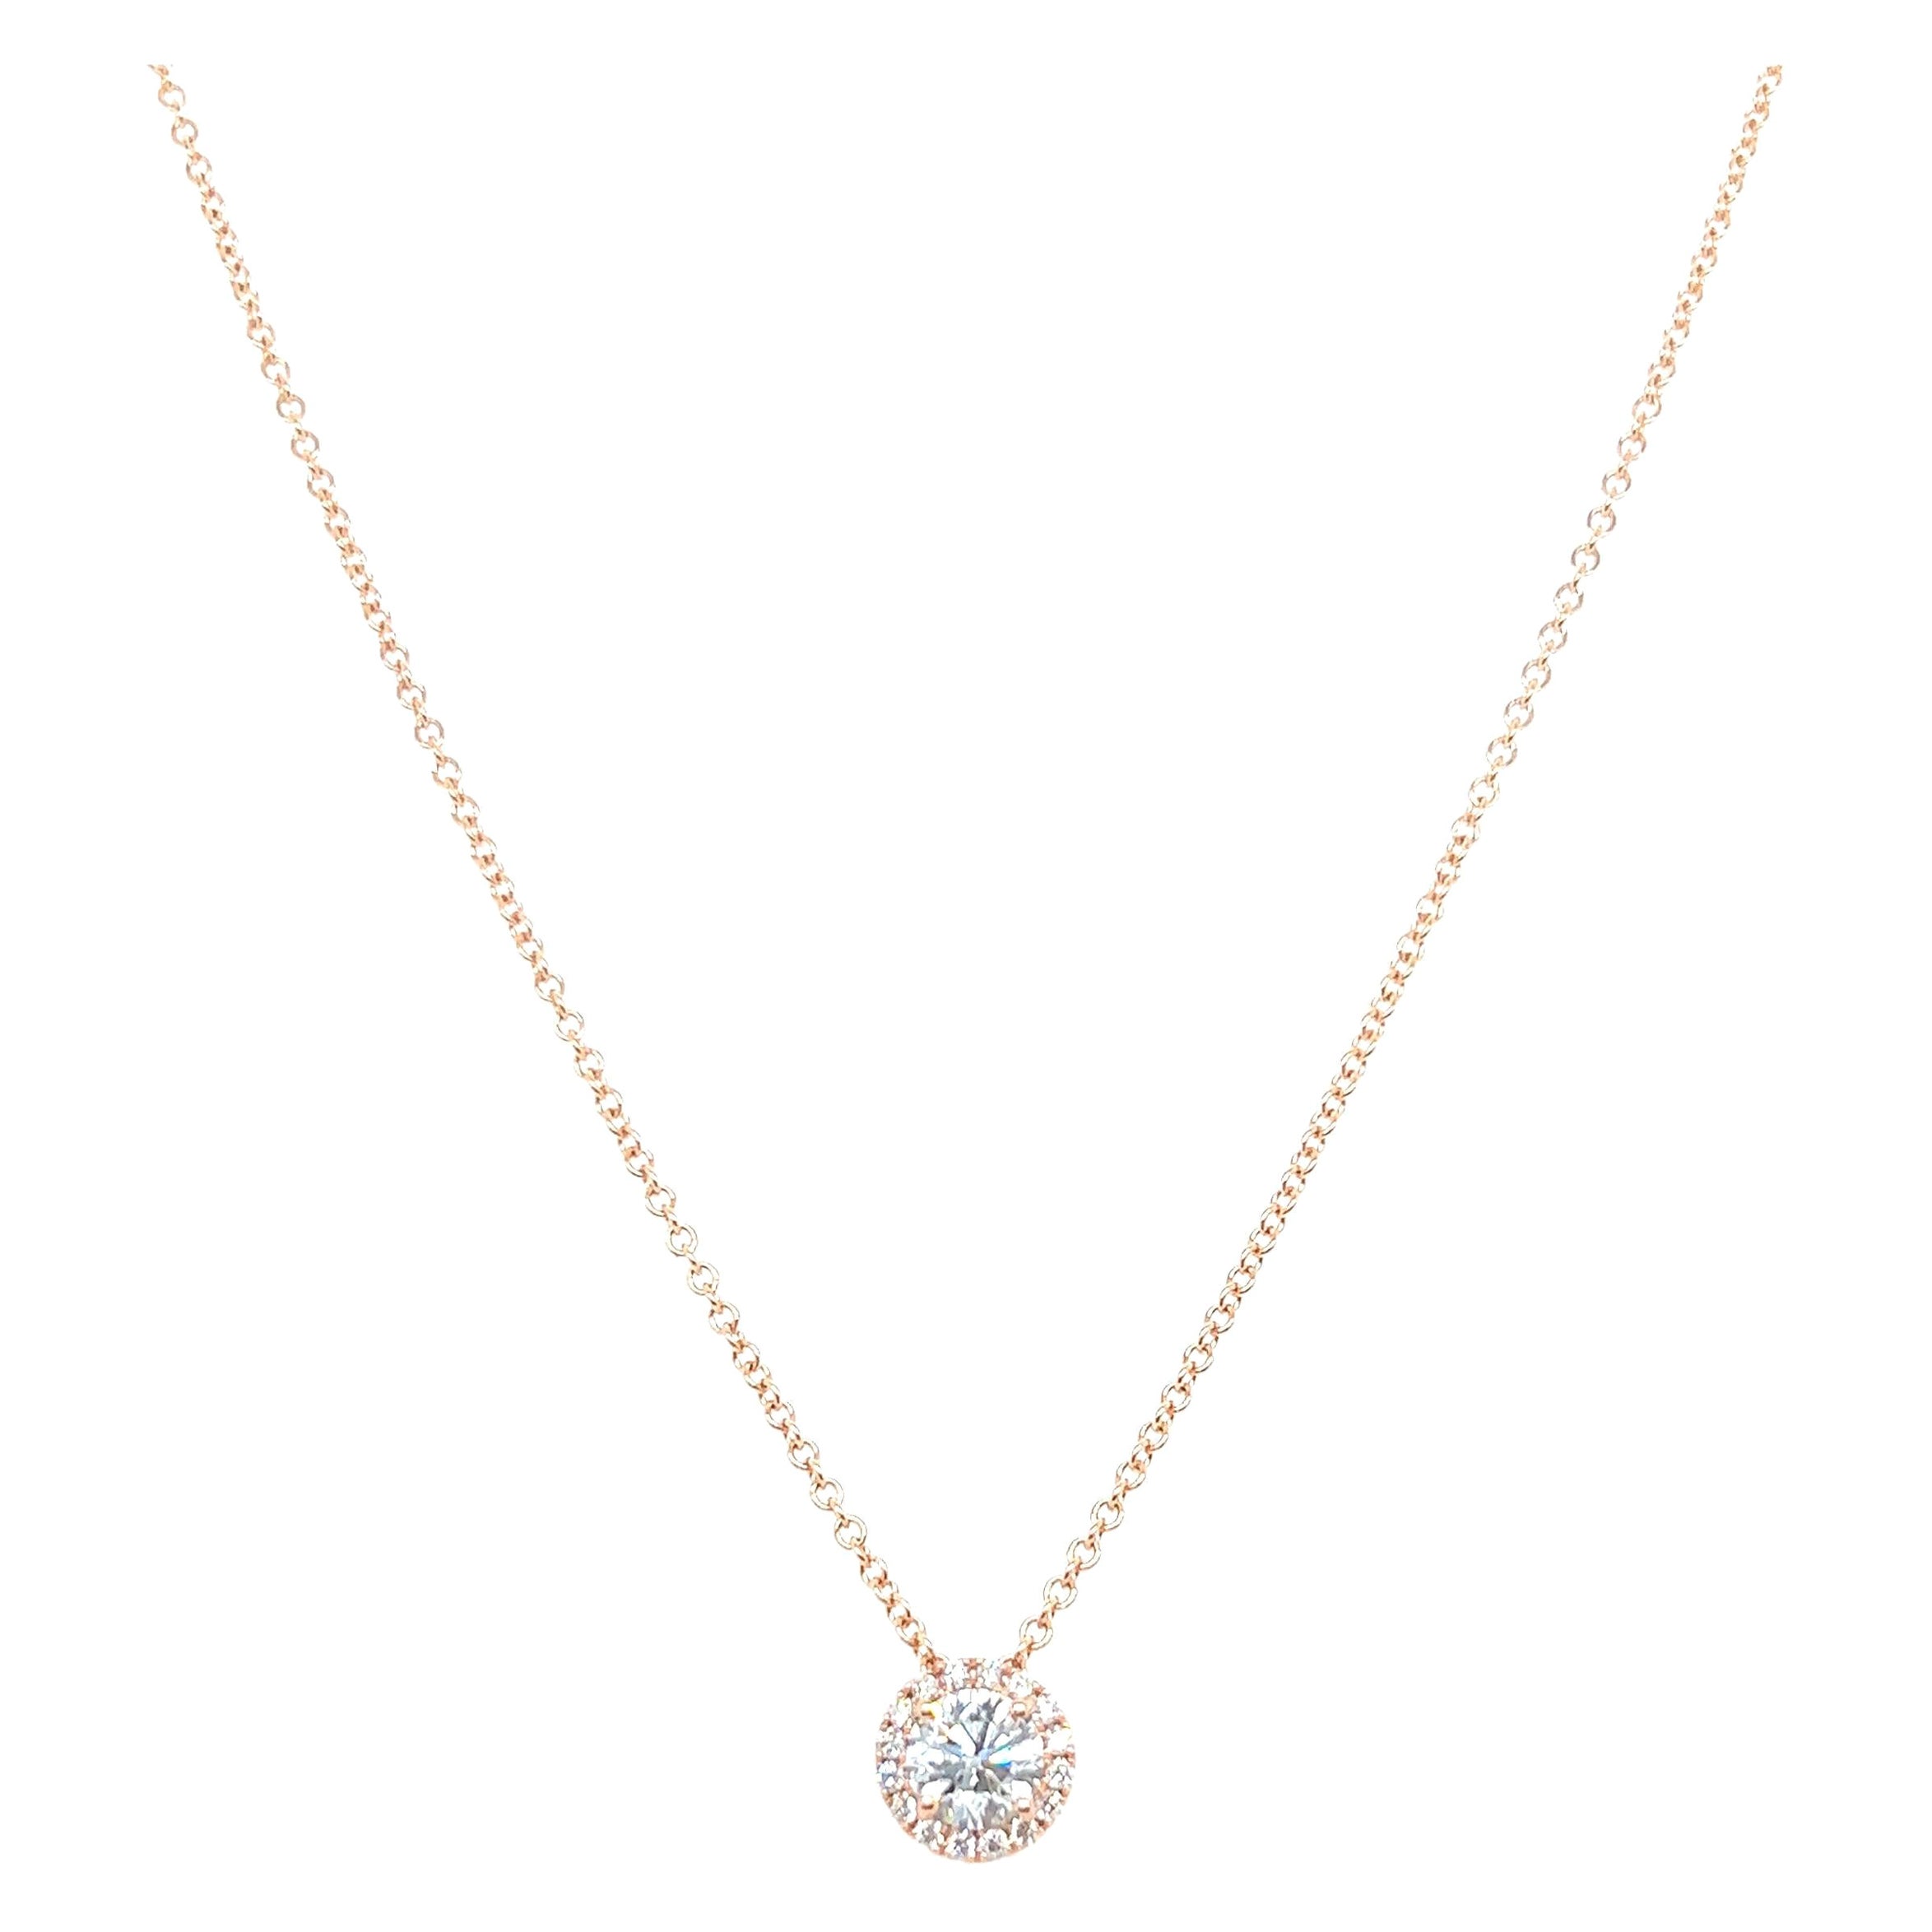 22 Inch 14k Yellow Gold 0.65 Carat Round Cut Diamond Solitaire Pendant Necklace